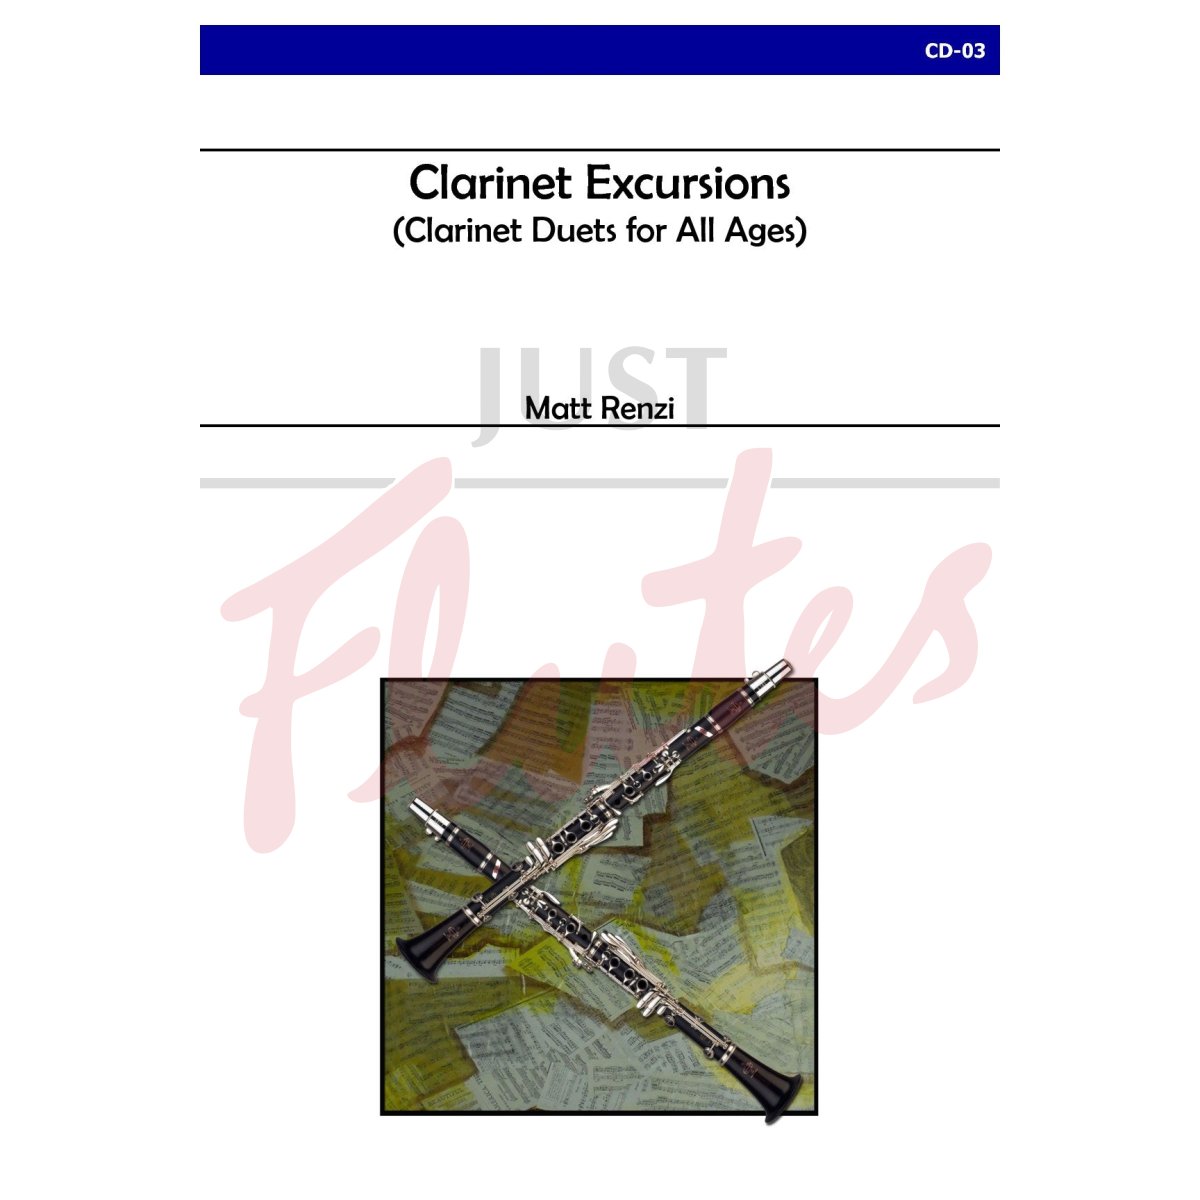 Clarinet Excursions for Clarinet Duet